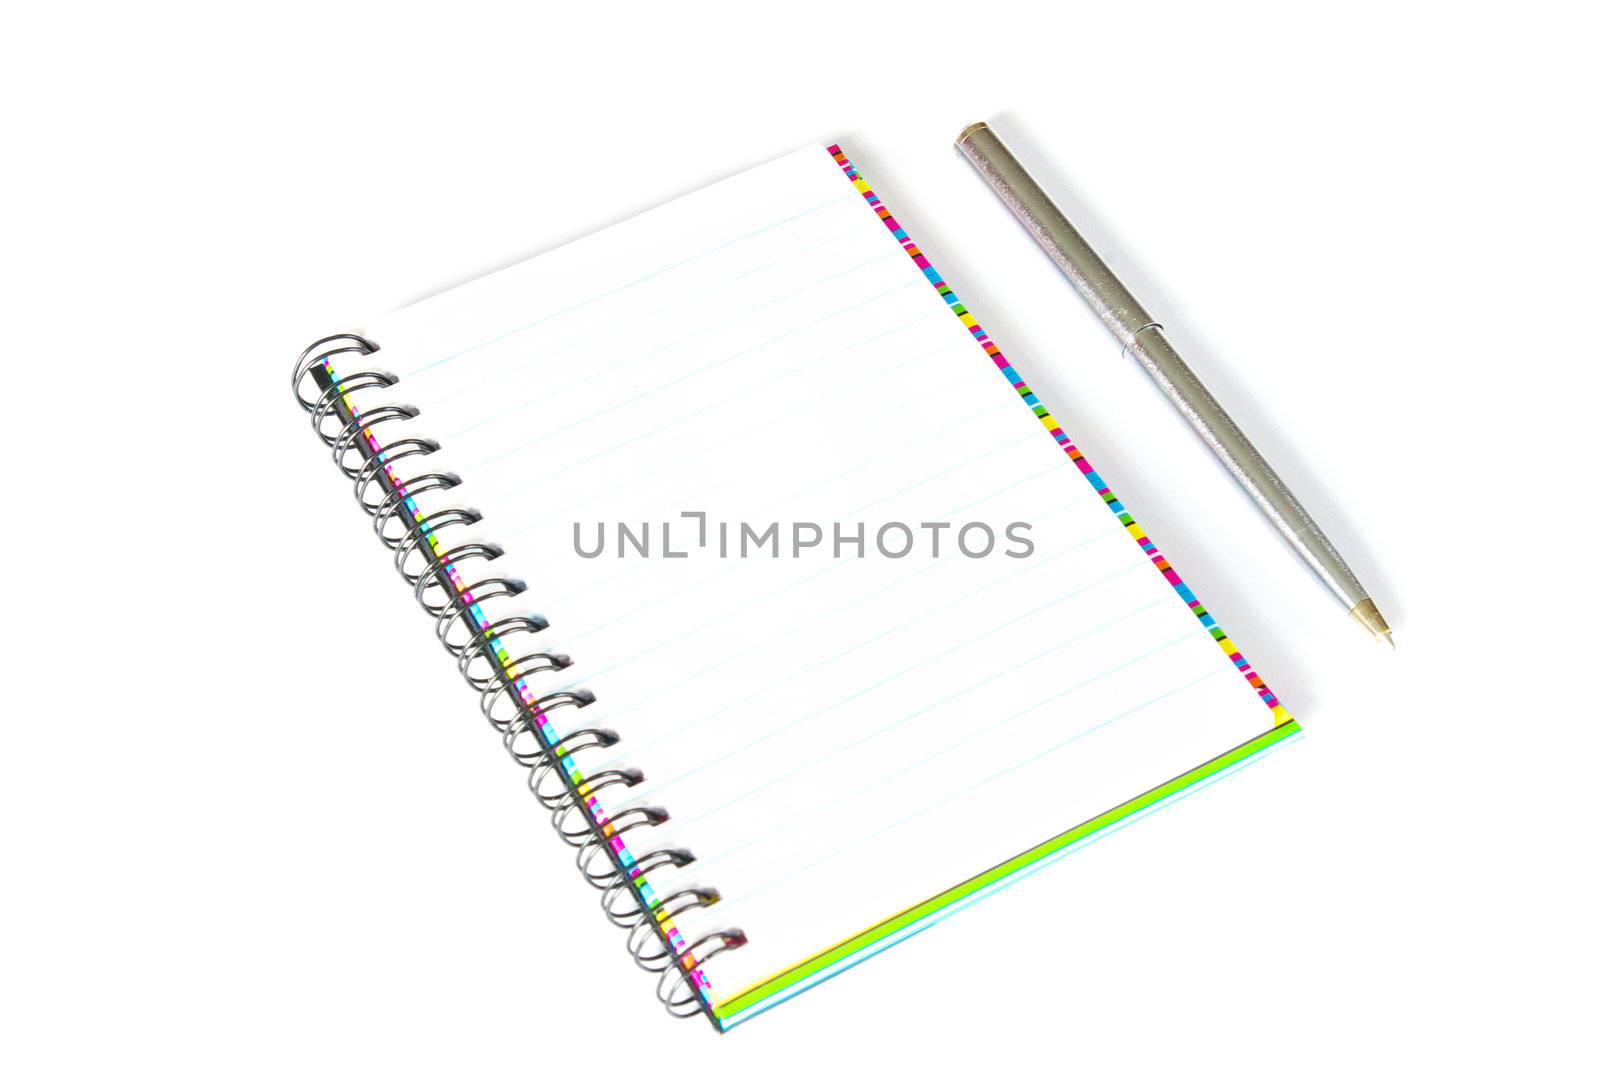 The notebook with the handle lays on a white background